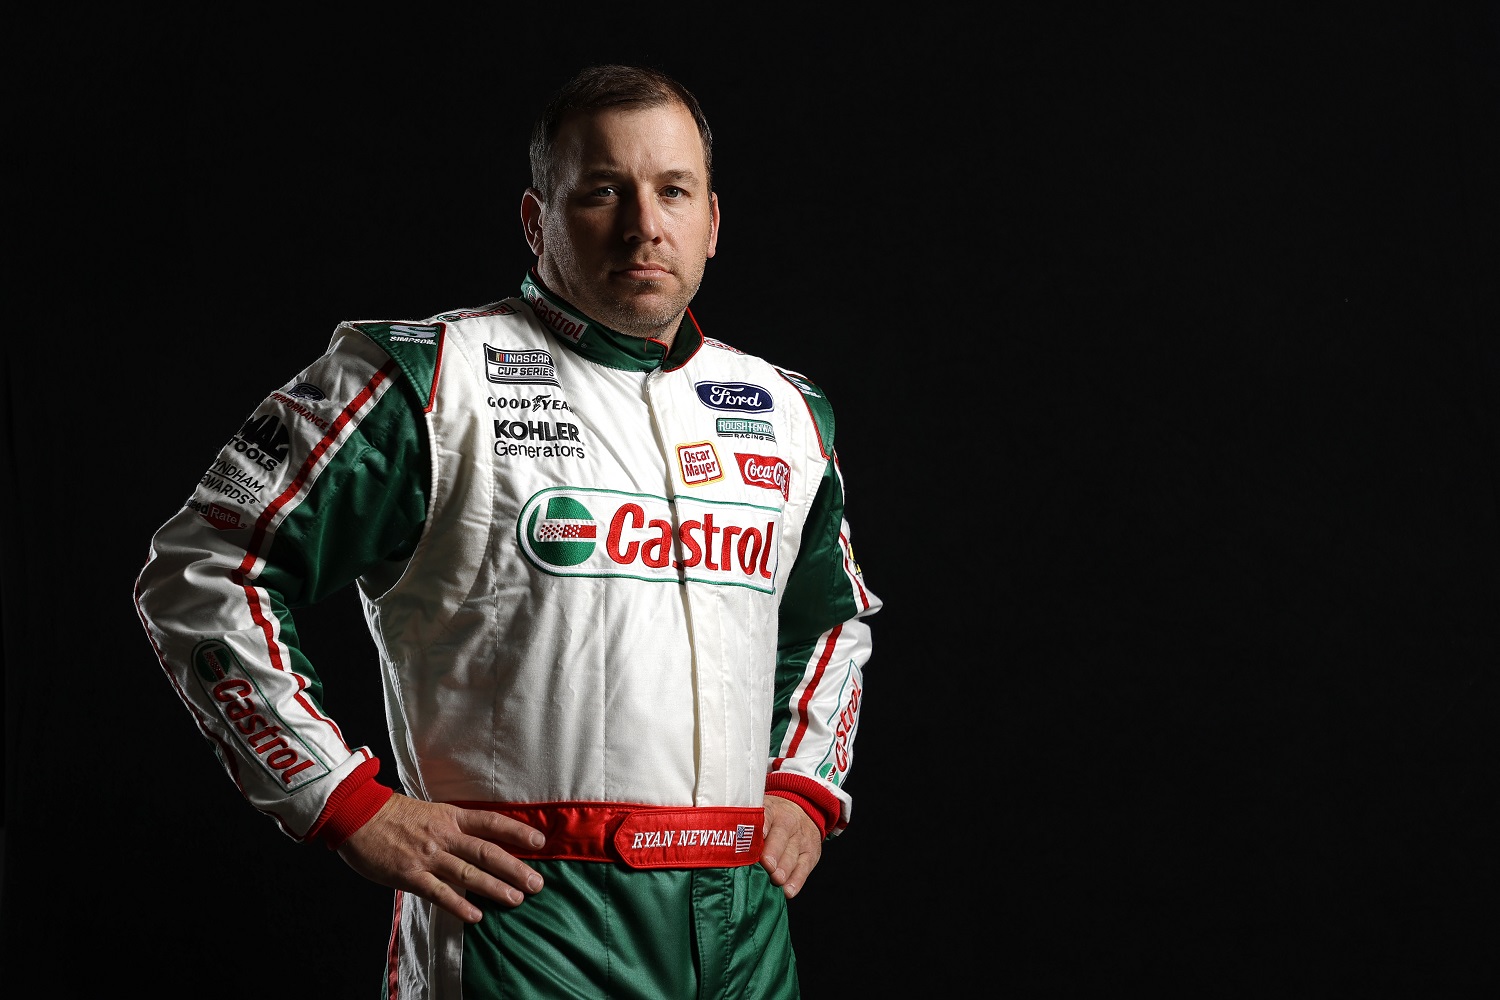 Roush Fenway Racing driver Ryan Newman poses for a photo during the 2021 NASCAR Production Days at Fox Sports Studios. | Jared C. Tilton/Getty Images